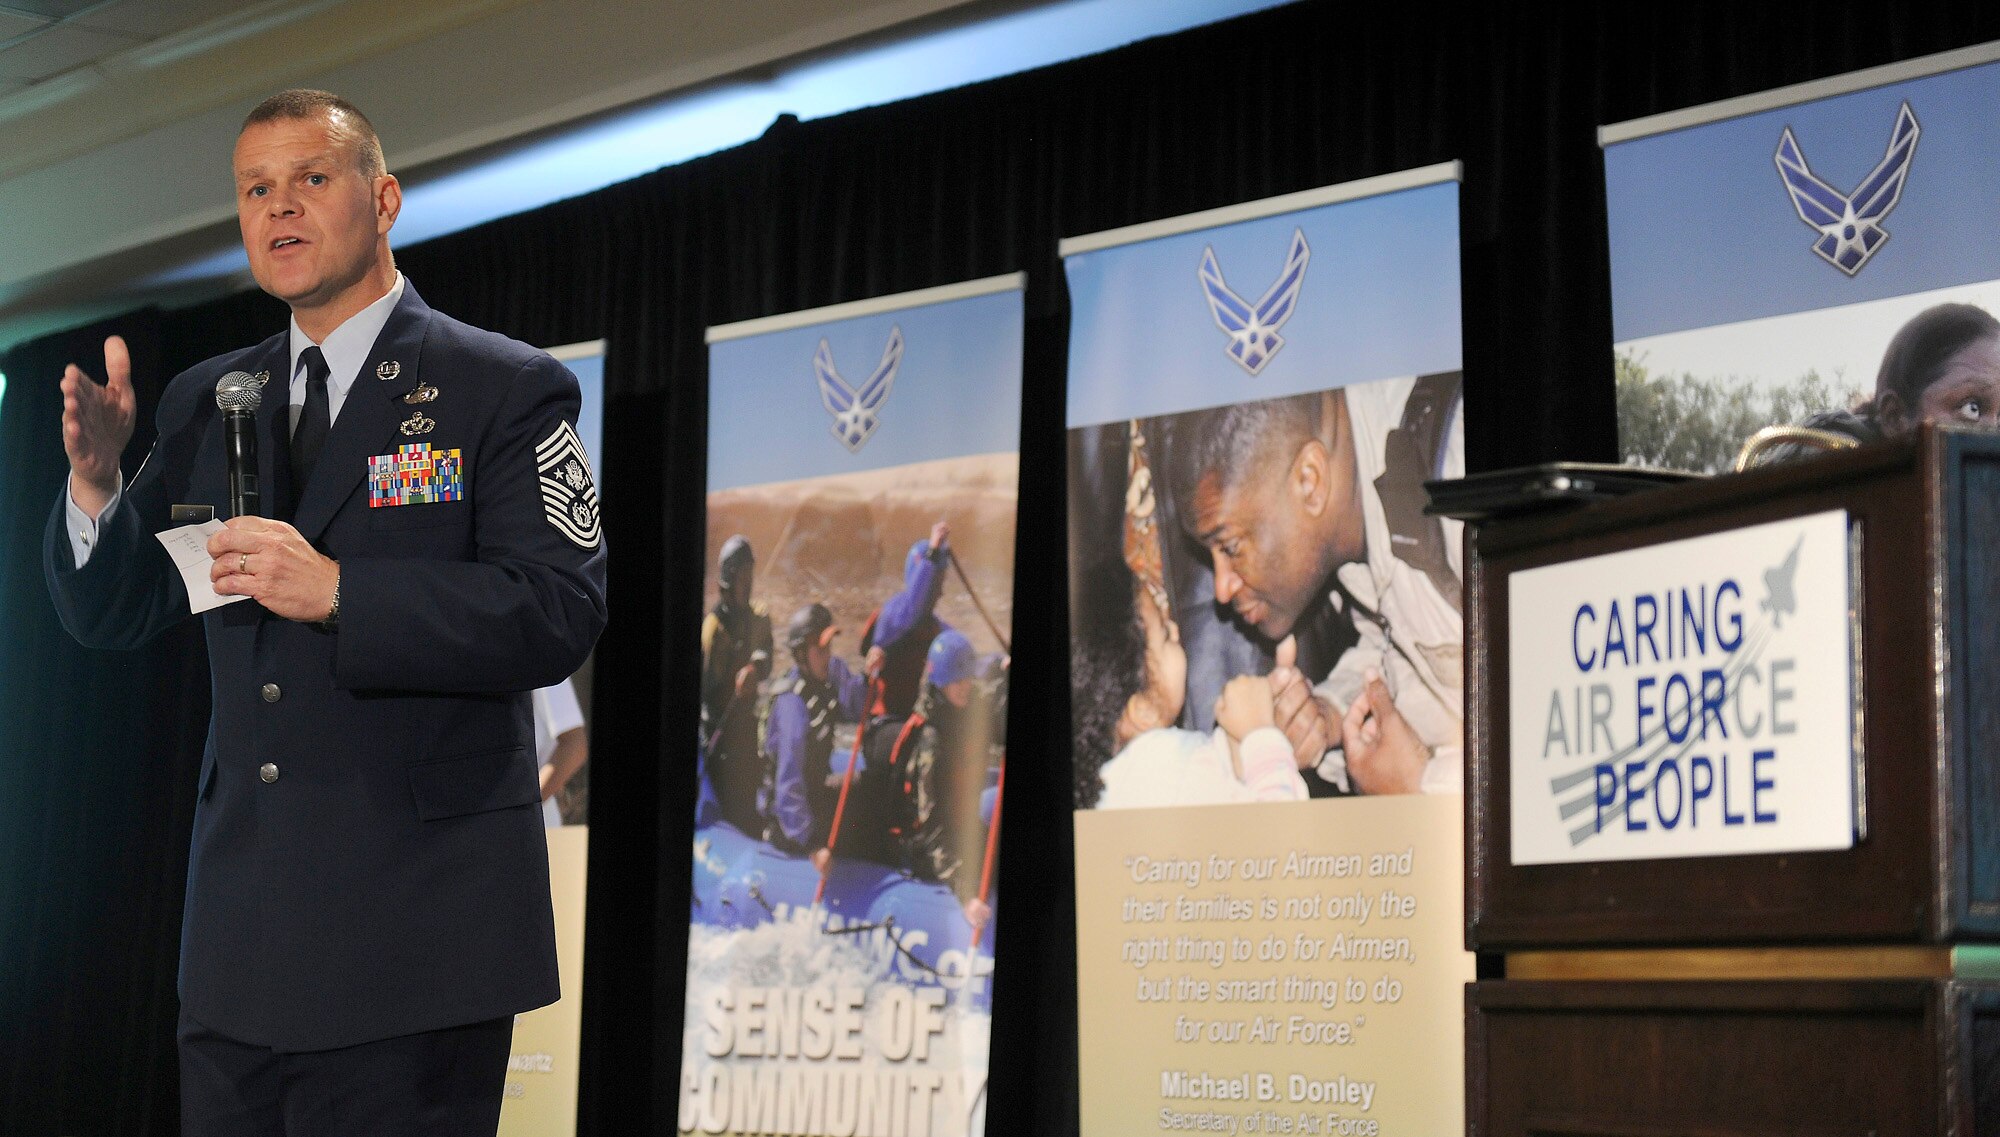 Chief Master Sgt. of the Air Force James A. Roy speaks to attendees at the Caring for People forum July 19, 2011, in Arlington, Va. More than 250 Air Force members and support professionals gathered for the three-day forum. (U.S. Air Force photo/Scott M. Ash)